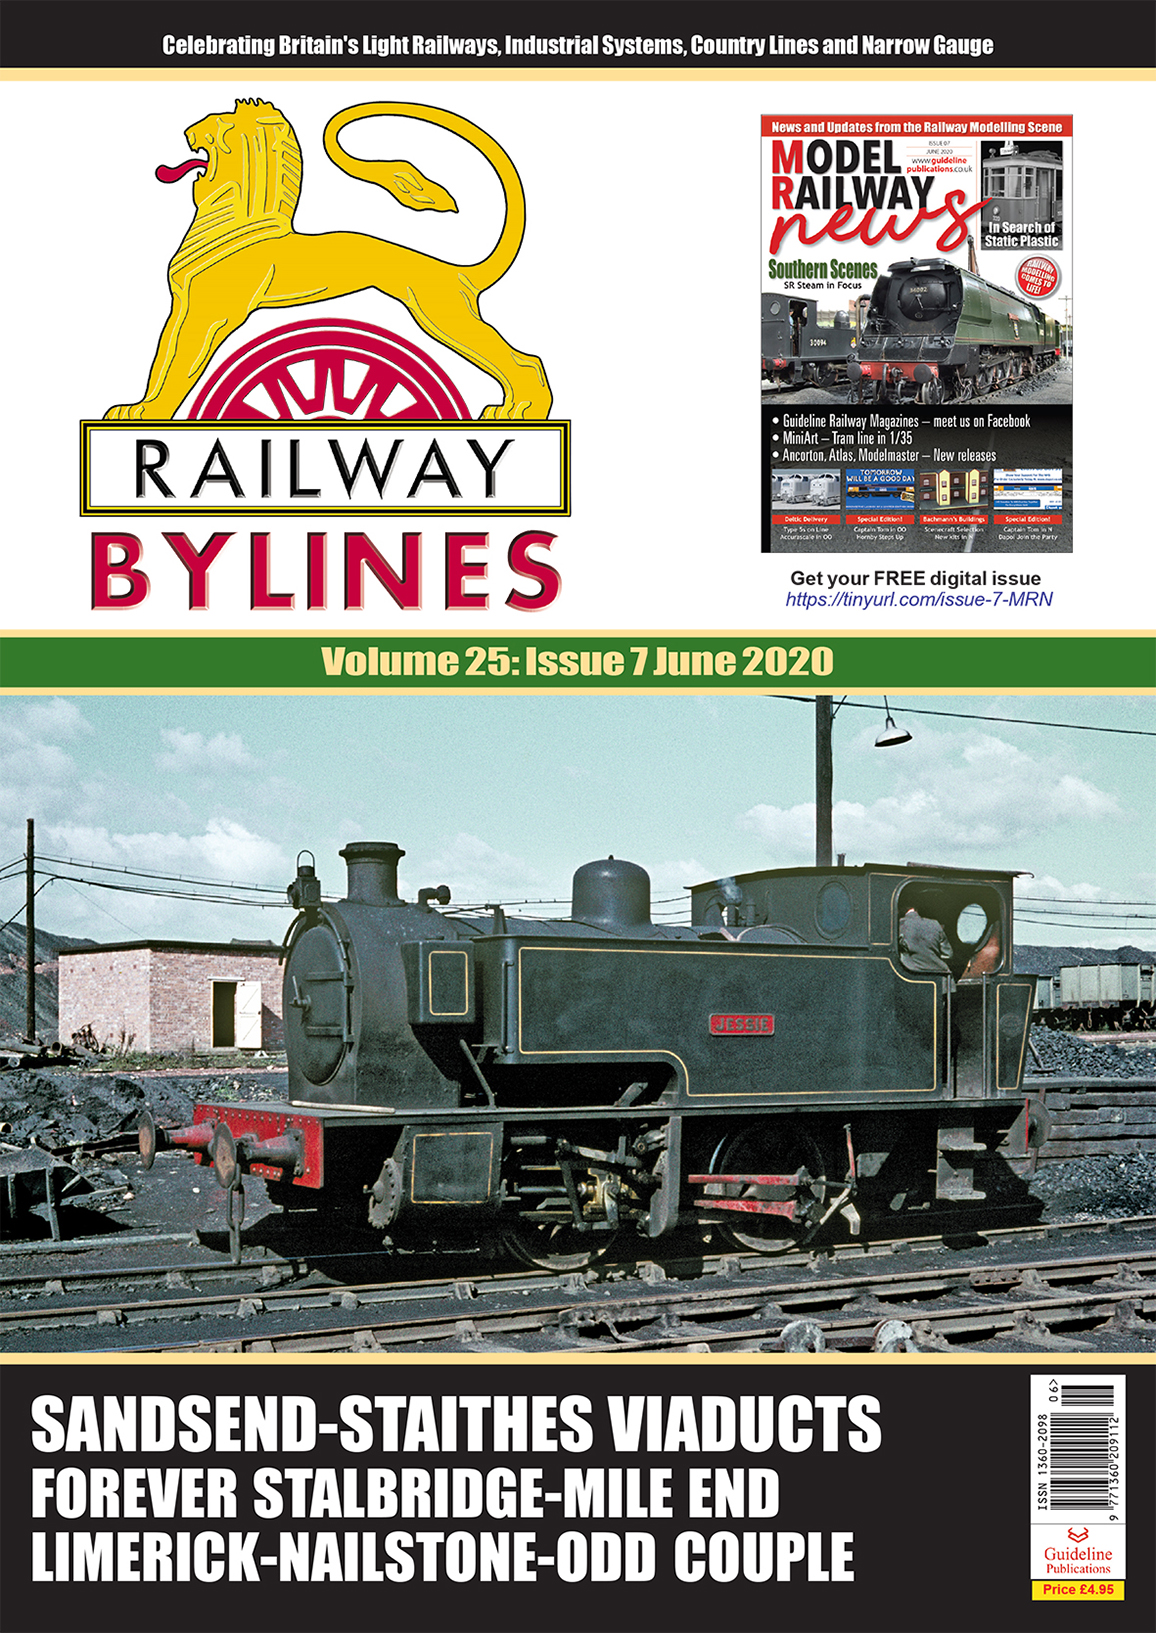 Guideline Publications Ltd Railway Bylines  vol 25 - issue 7 June 2020 